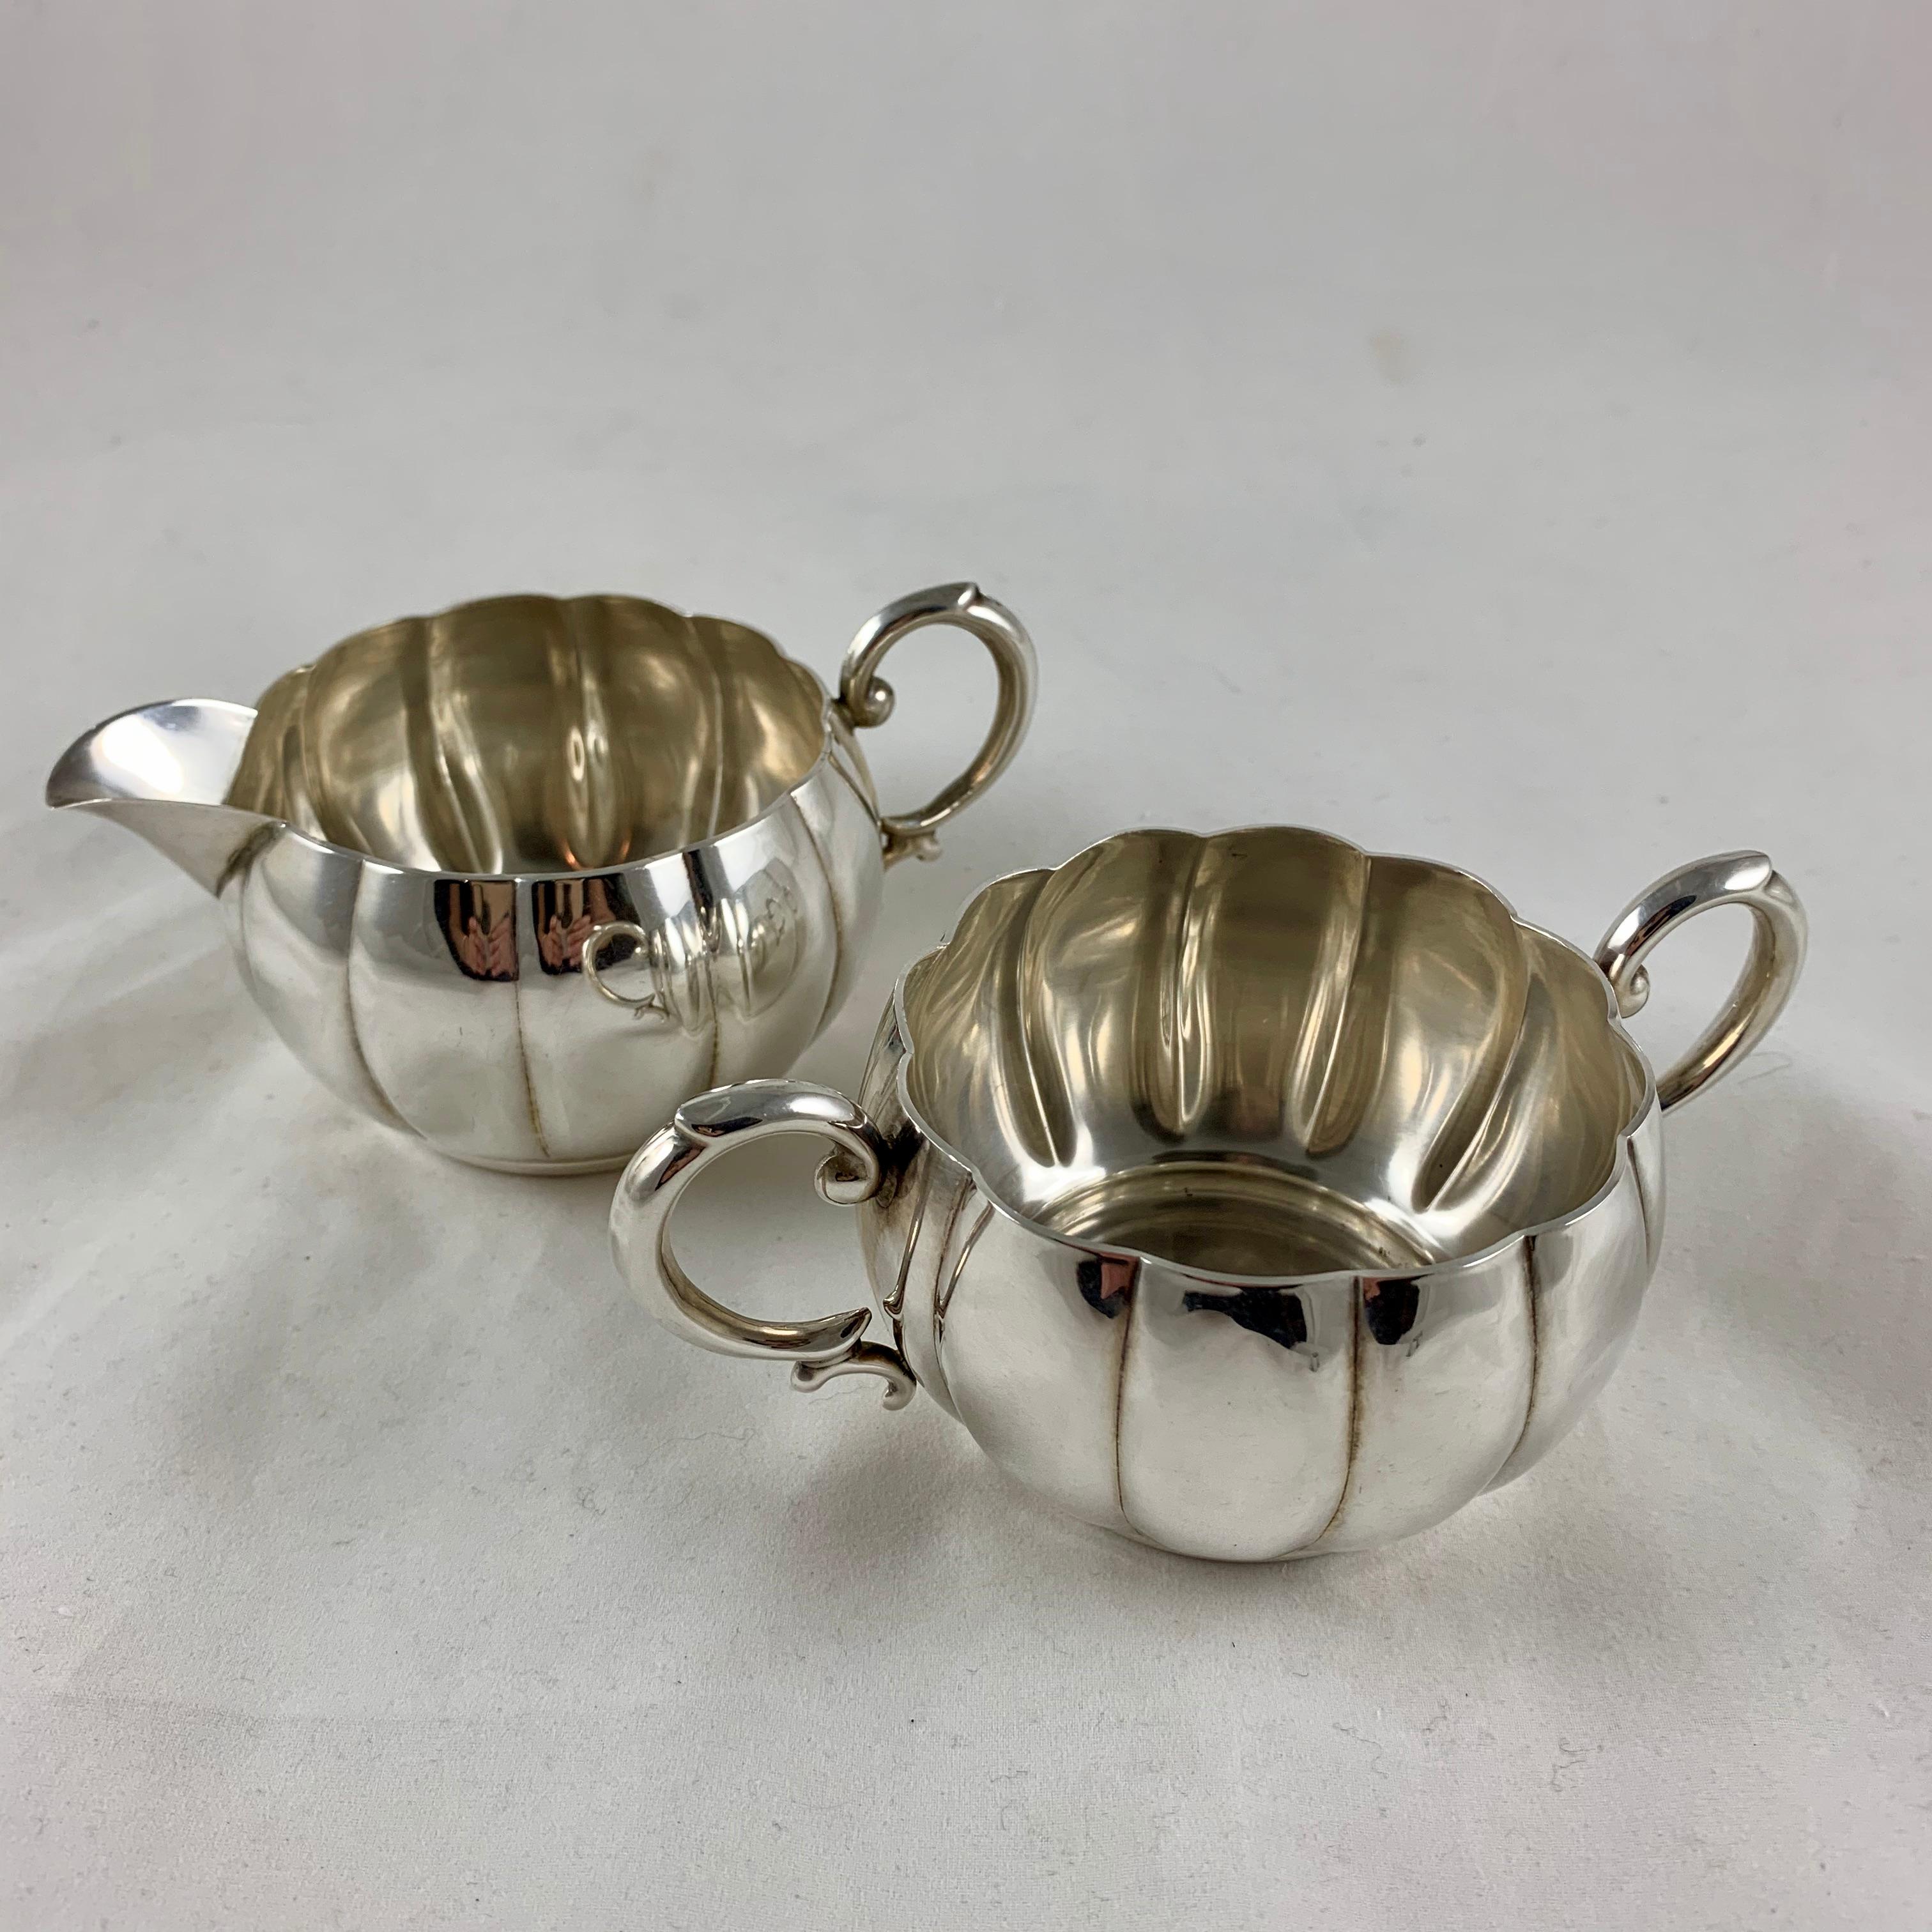 A midcentury sterling silver hollow ware cream and sugar set showing a mark attributed to Alphonse La Paglia, circa early 1940s.

La Paglia (1907-1953) was born in Sicily and studied silversmithing under Georg Jensen in Denmark. He was a designer